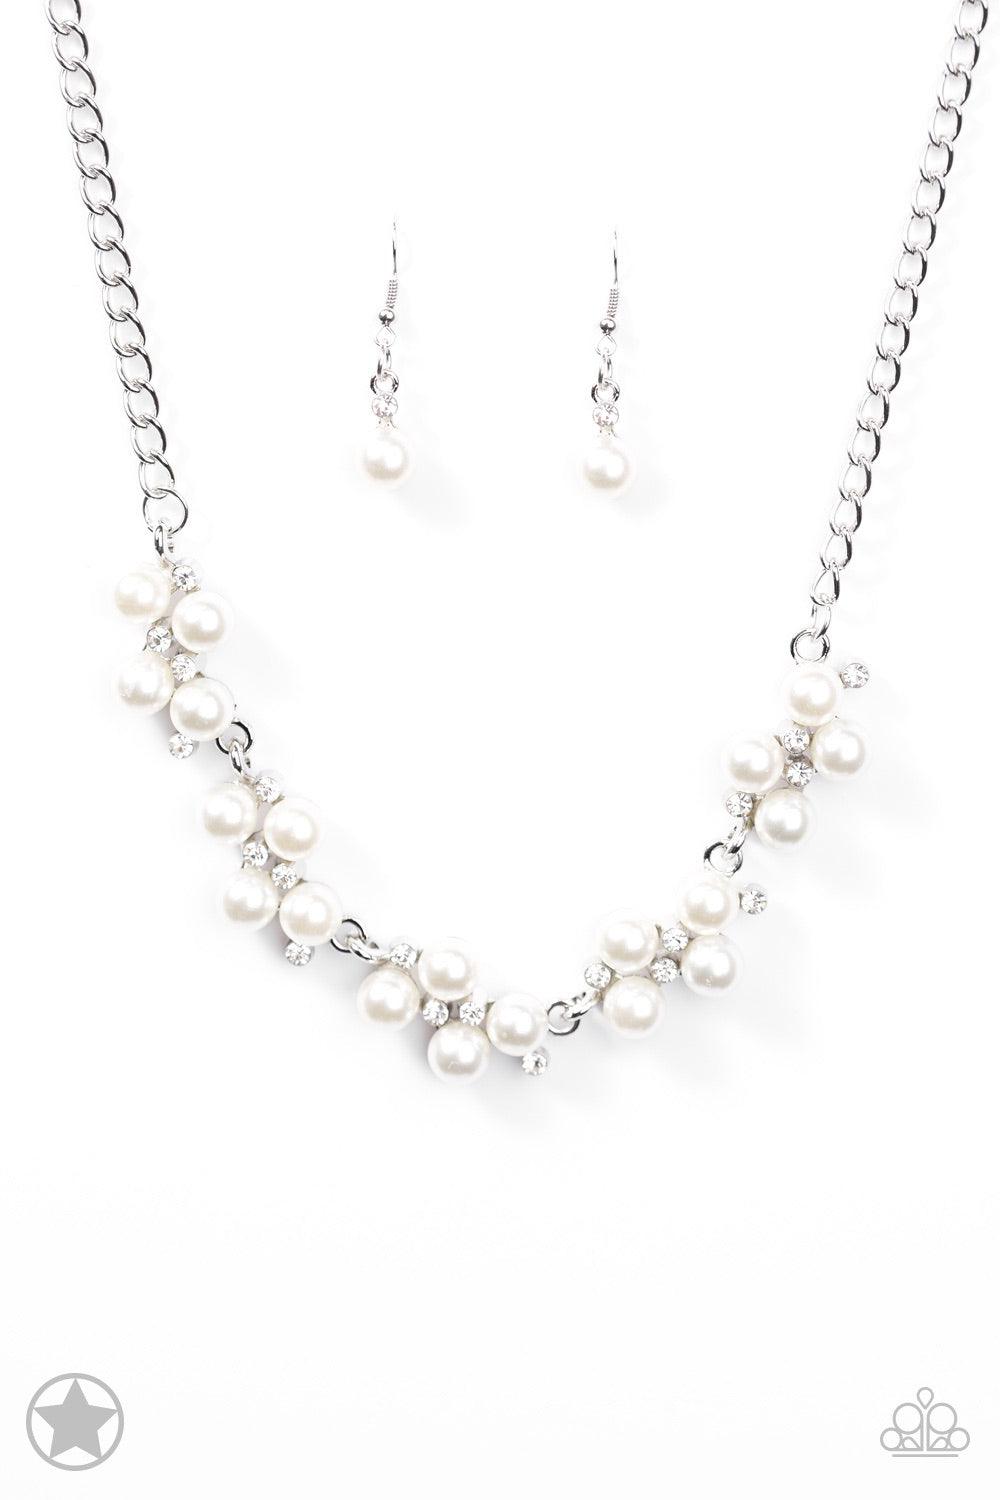 Paparazzi Accessories Love Story - White Dainty clusters of shimmery white pearls are dusted with sparkling rhinestones, creating a romantic, timeless design. Features an adjustable clasp closure. Jewelry